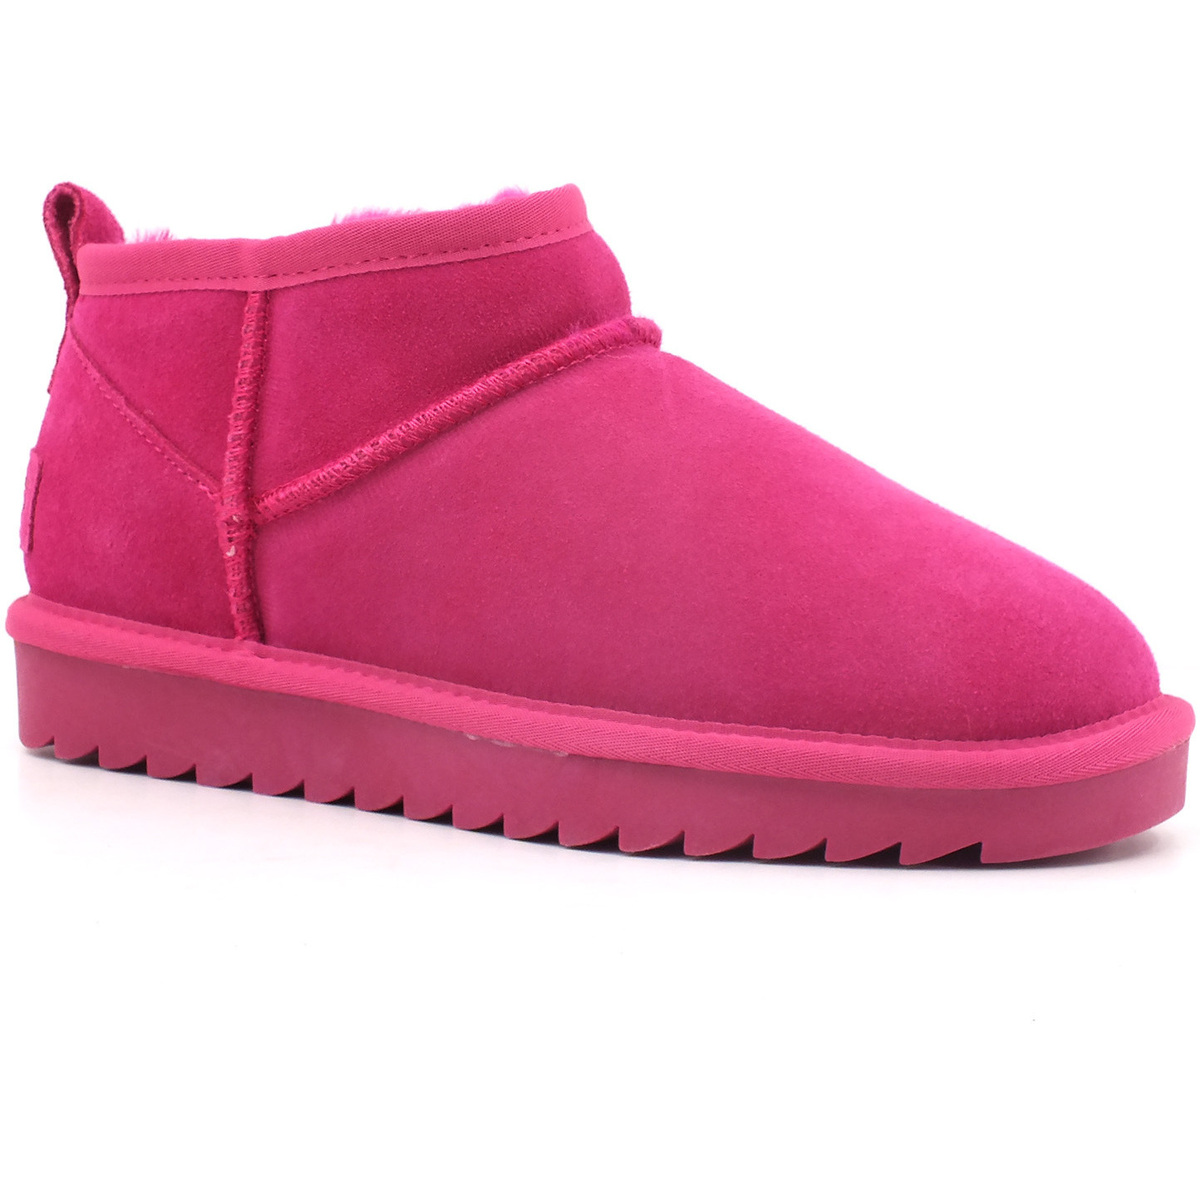 Chaussures Femme Bottes Colors of California Stivaletto Pelo Donna Fuxia HC.YW078 Rose